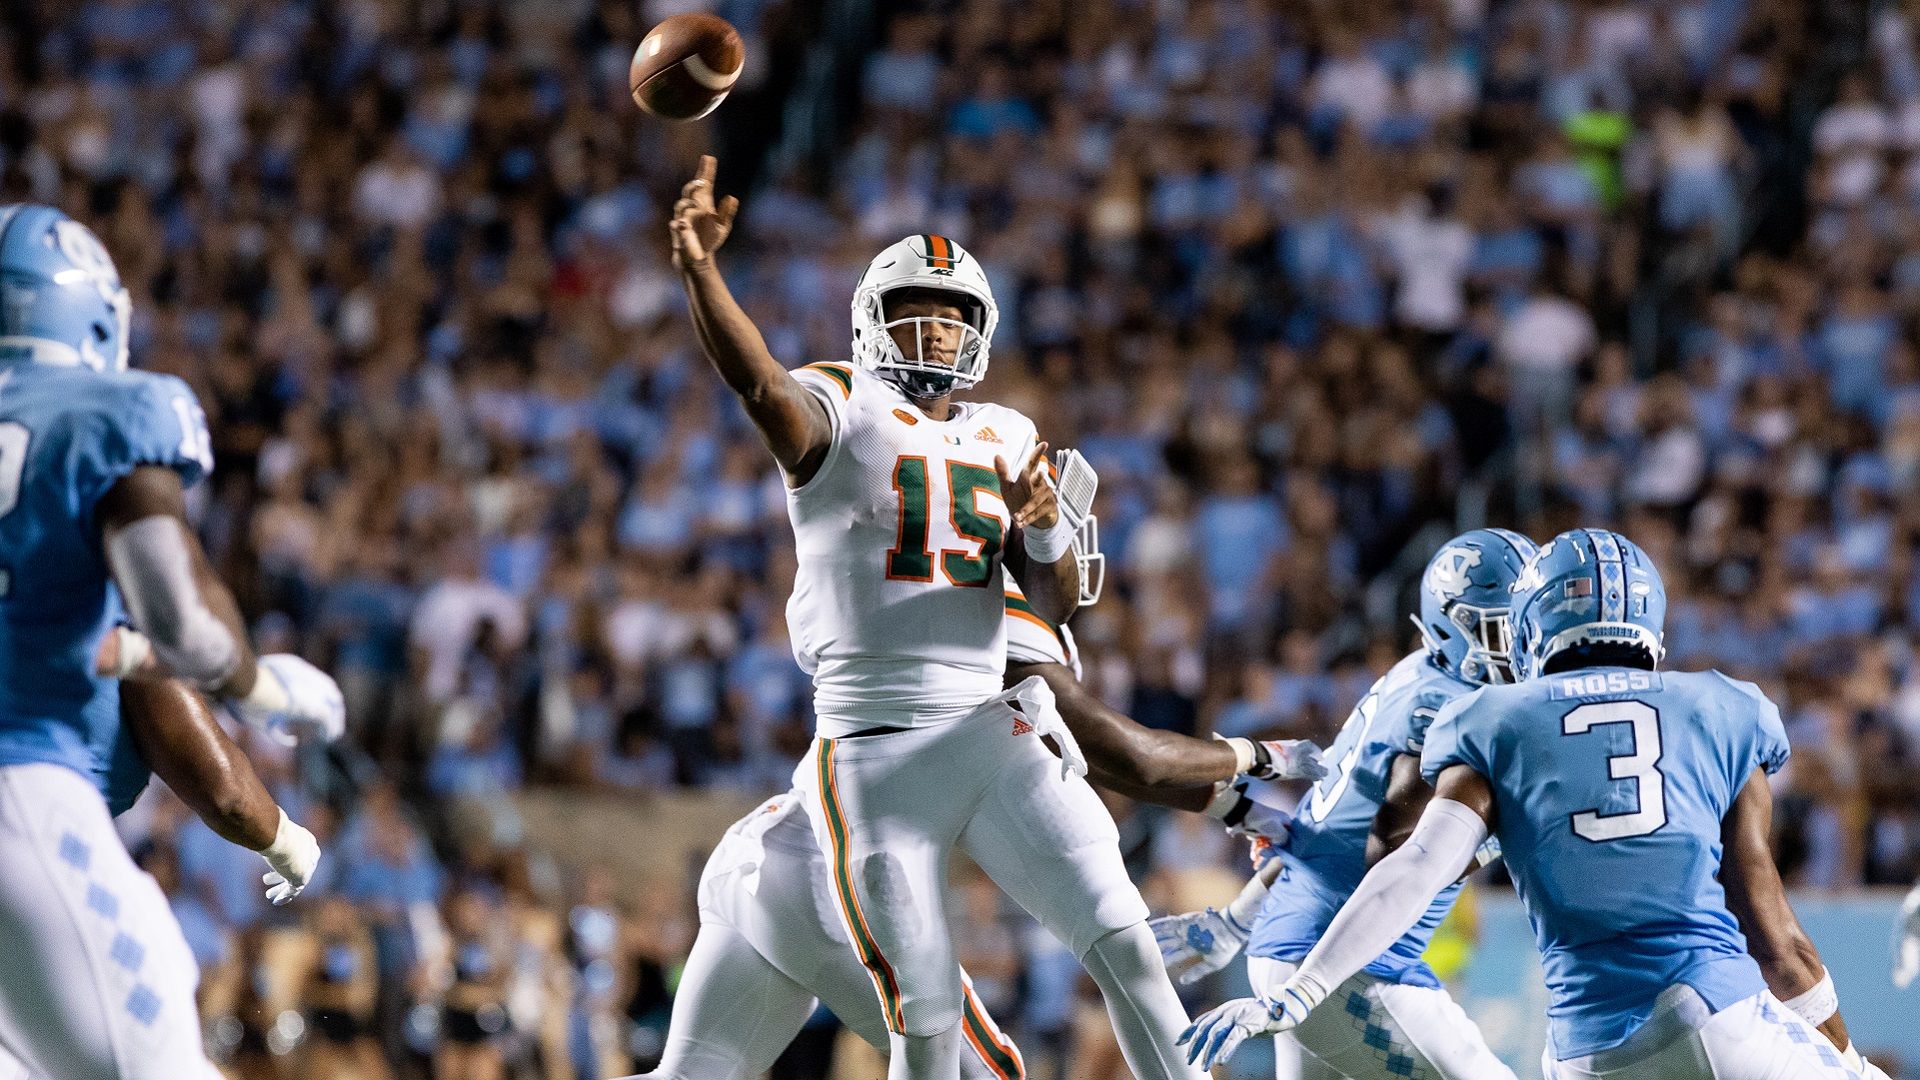 Canes Fall at UNC, 28-25